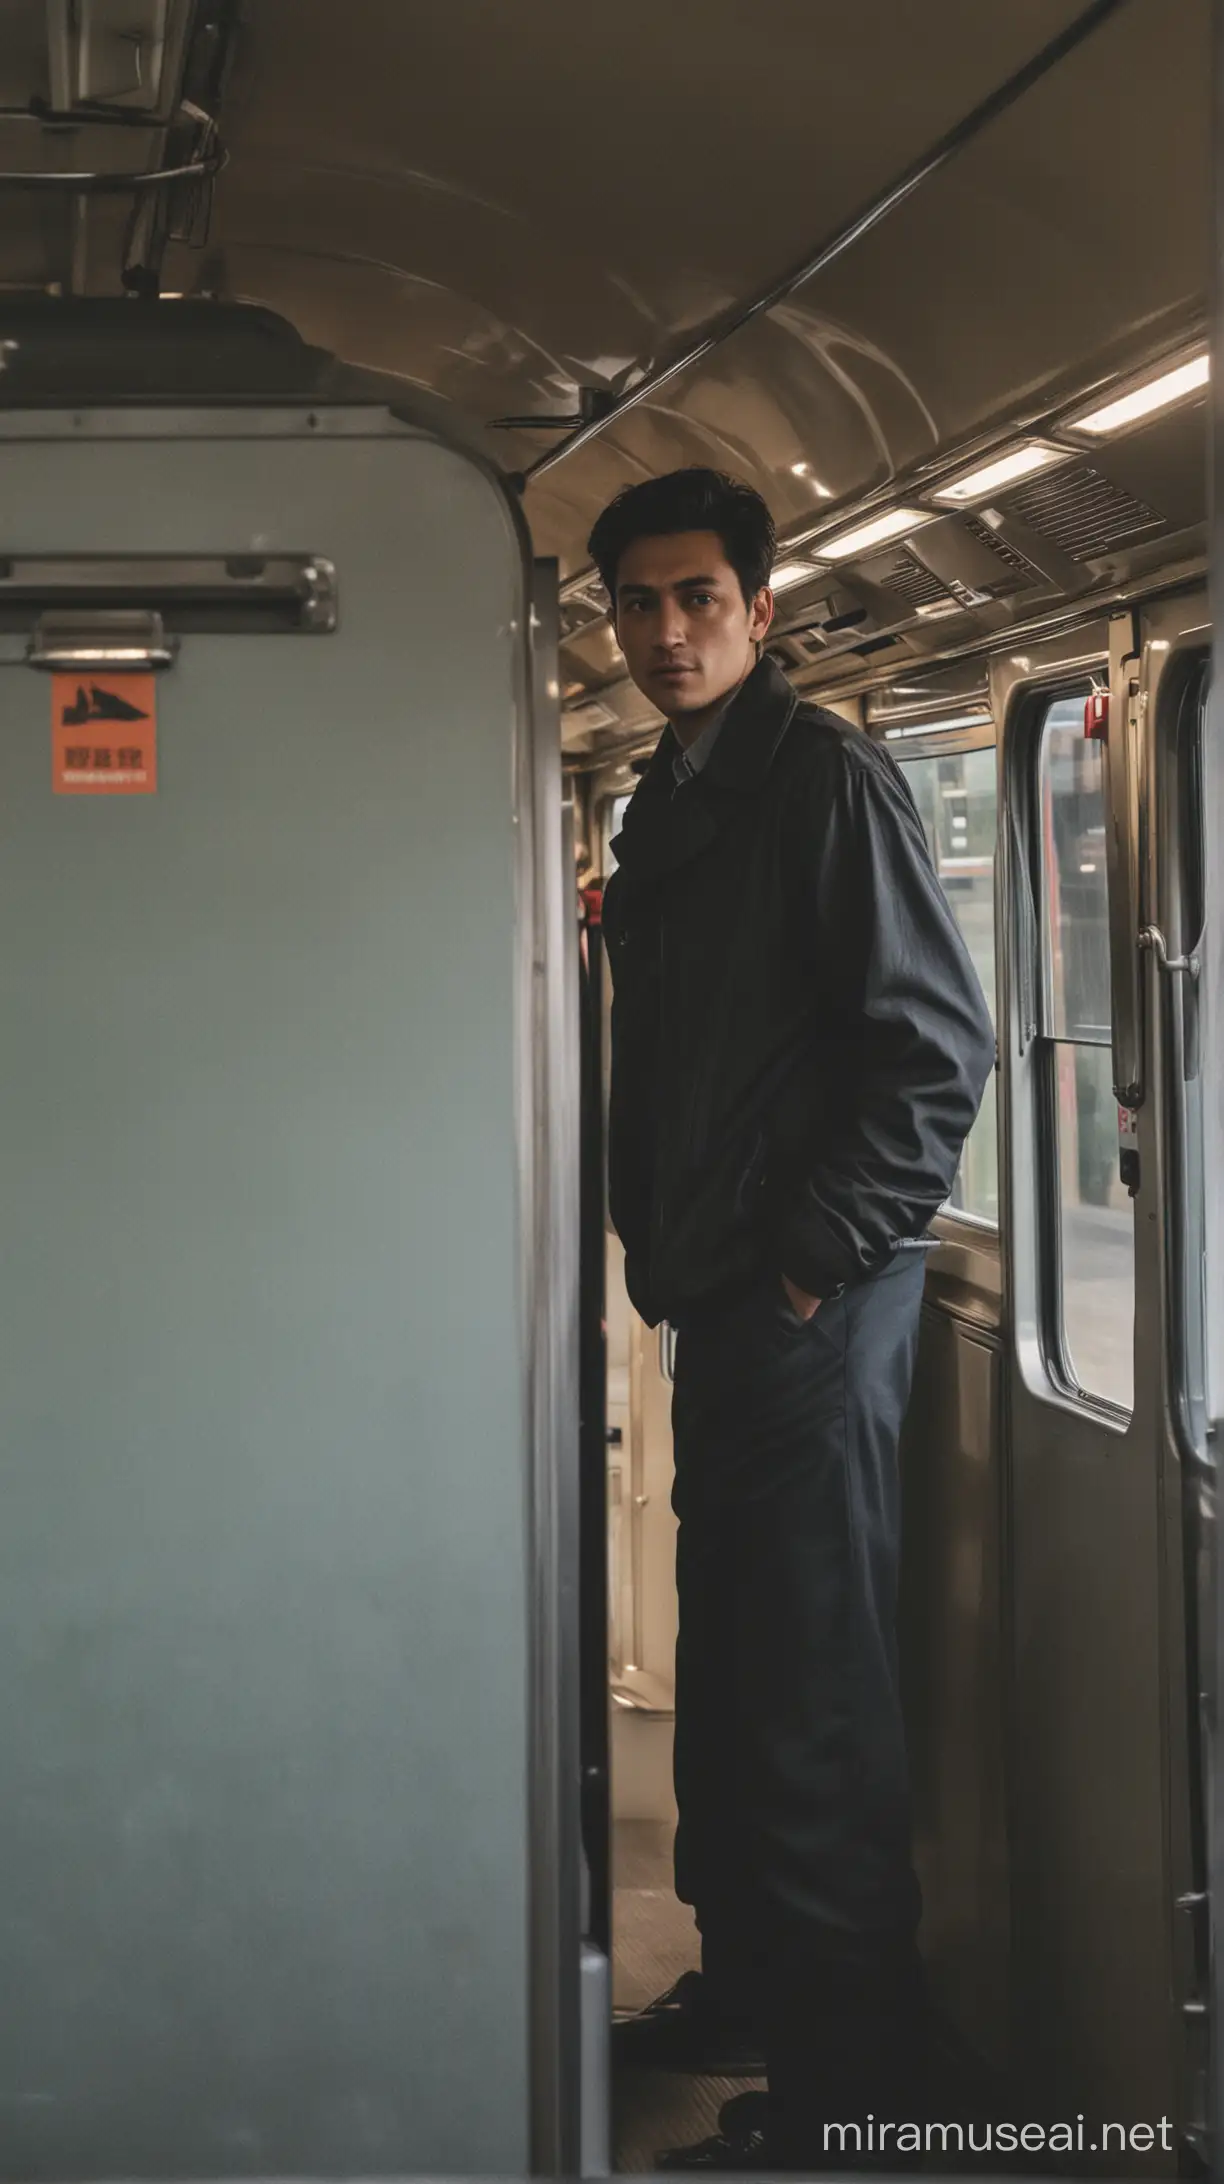 A man standing in the train